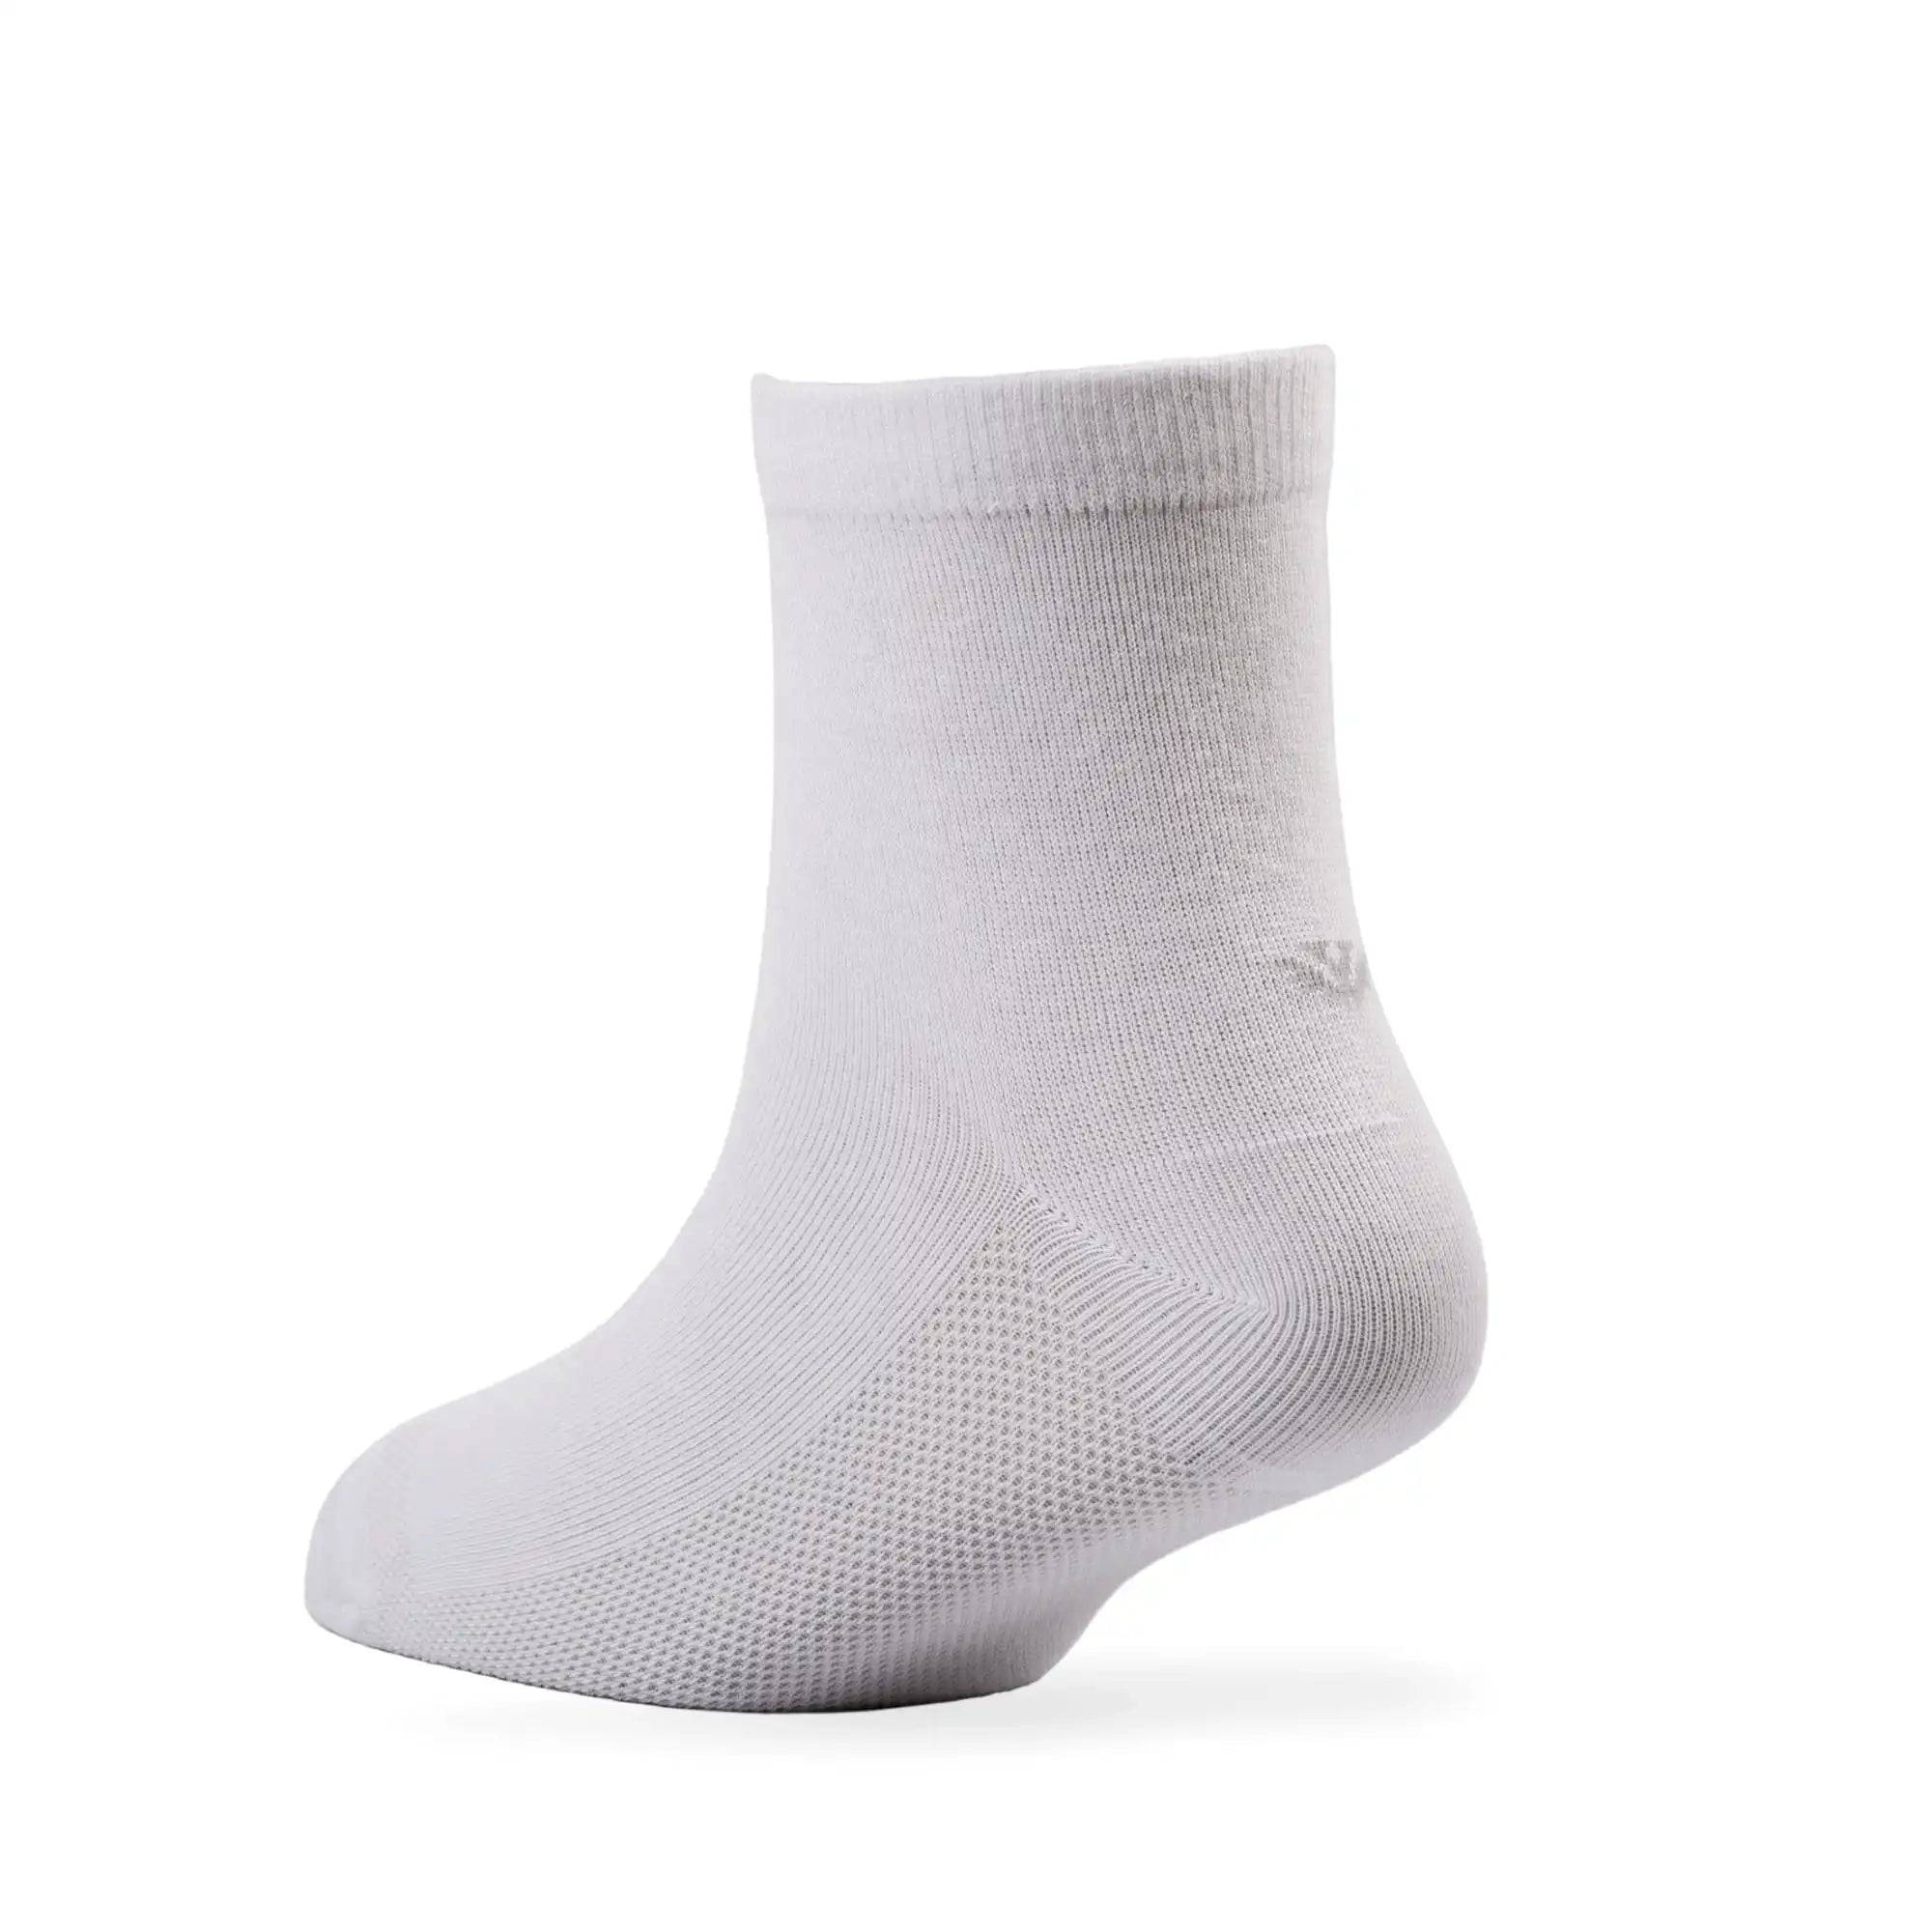 Young Wings Men's White Colour Cotton Fabric Solid Ankle Length Socks - Pack of 5, Style no. M1-2143 N